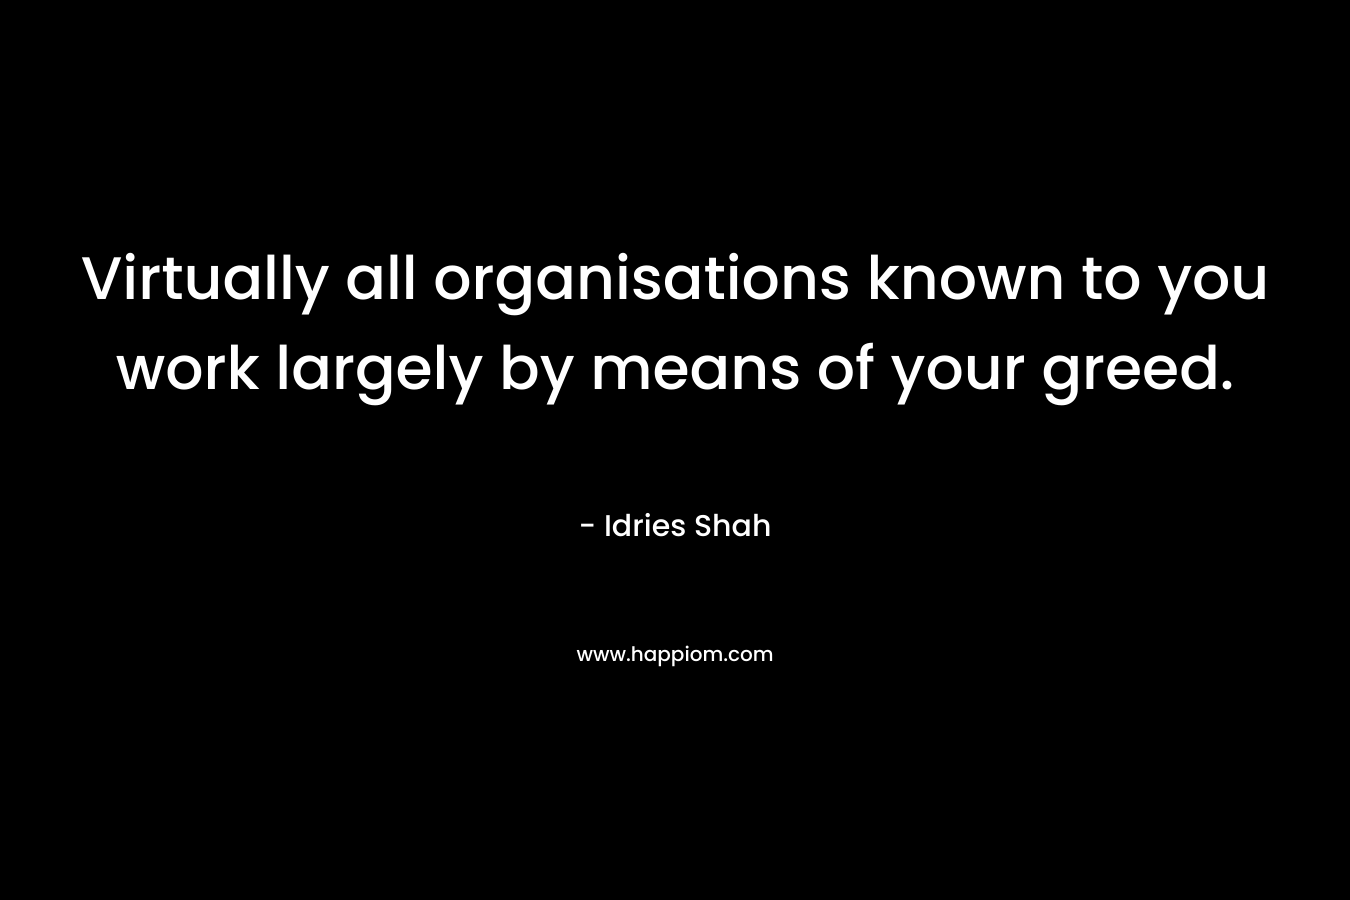 Virtually all organisations known to you work largely by means of your greed. – Idries Shah